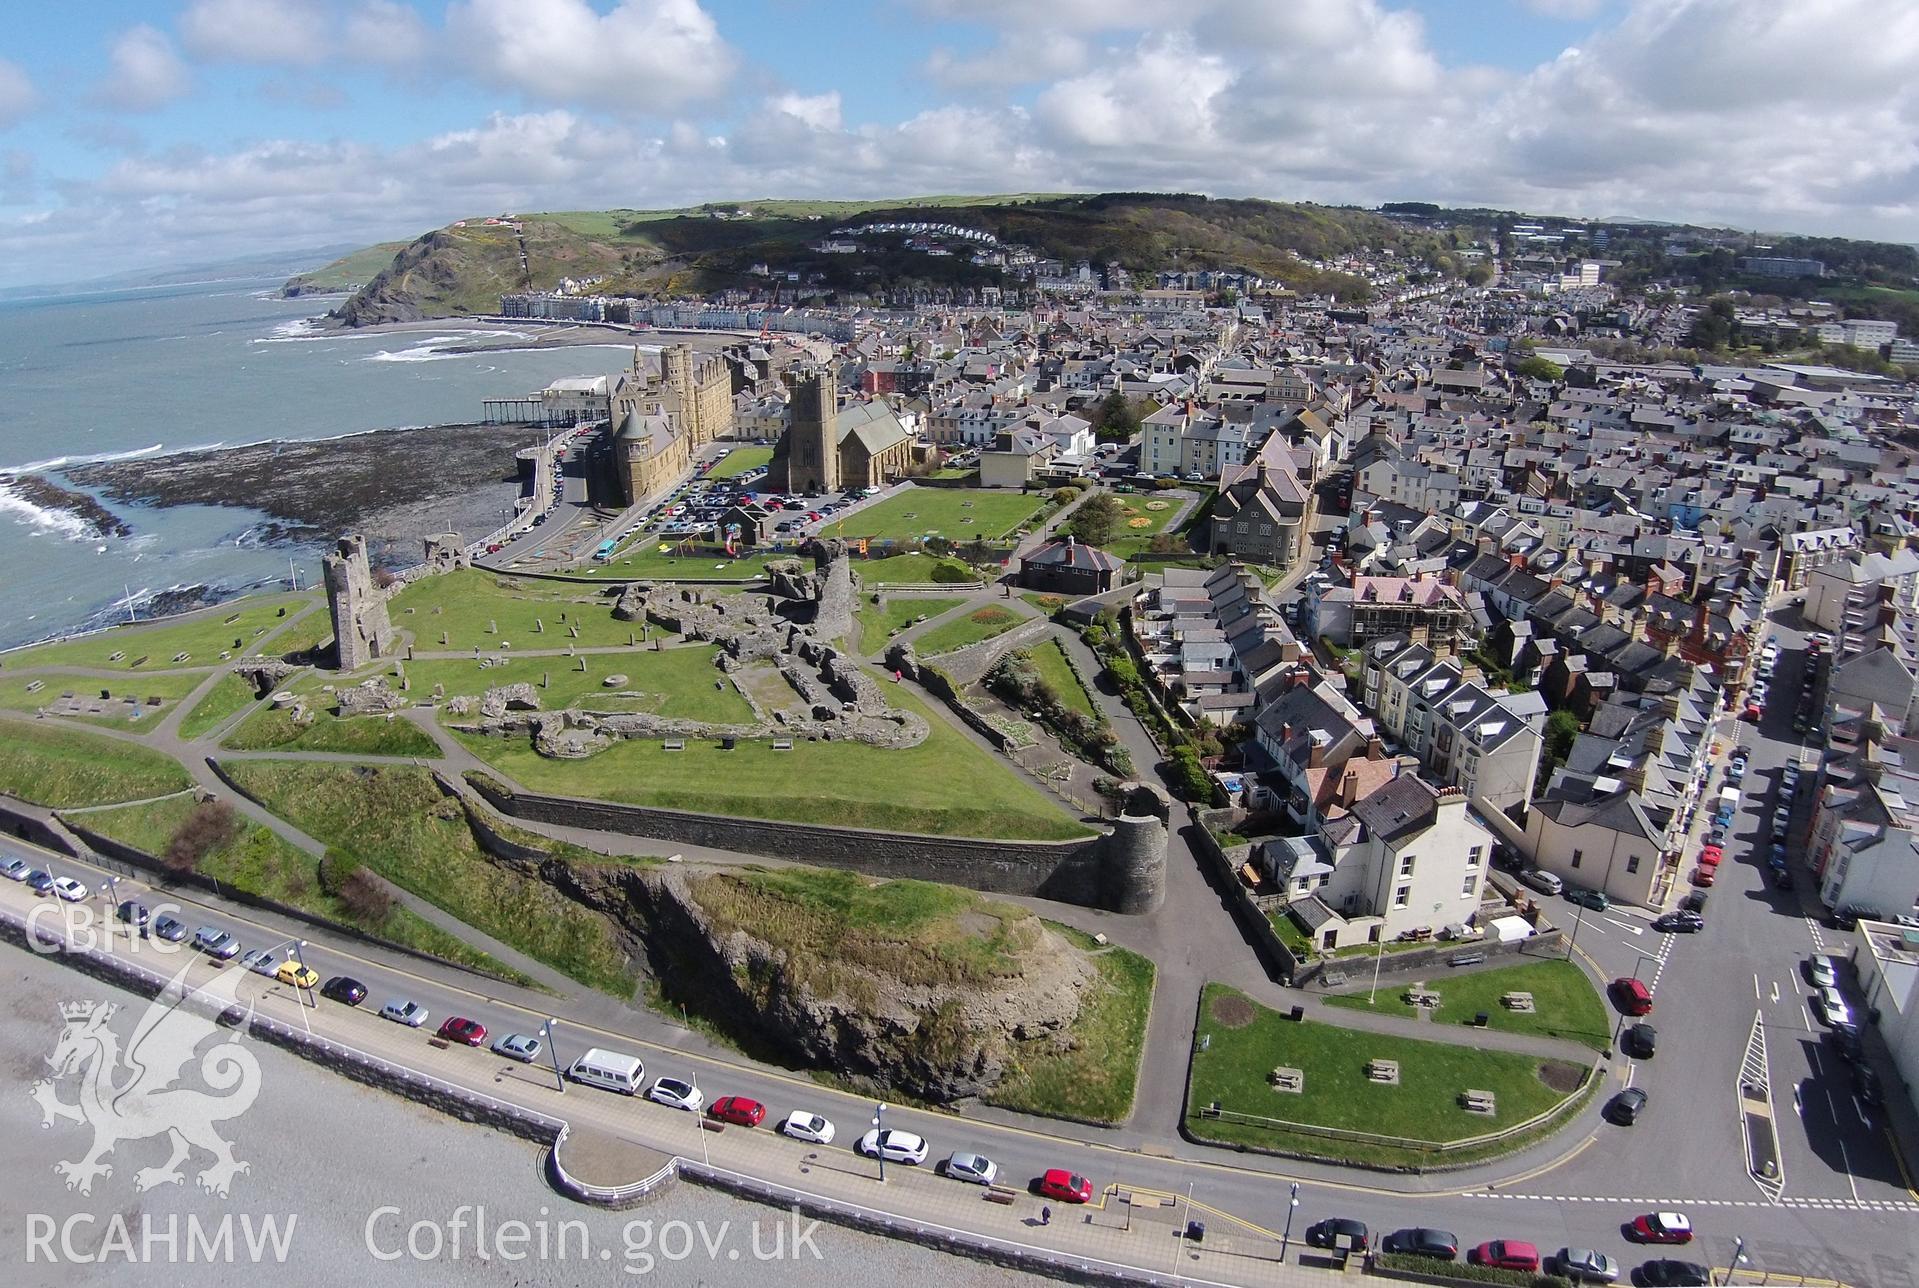 Aerial photograph showing Aberystwyth taken by Paul Davis, 29th April 2015.